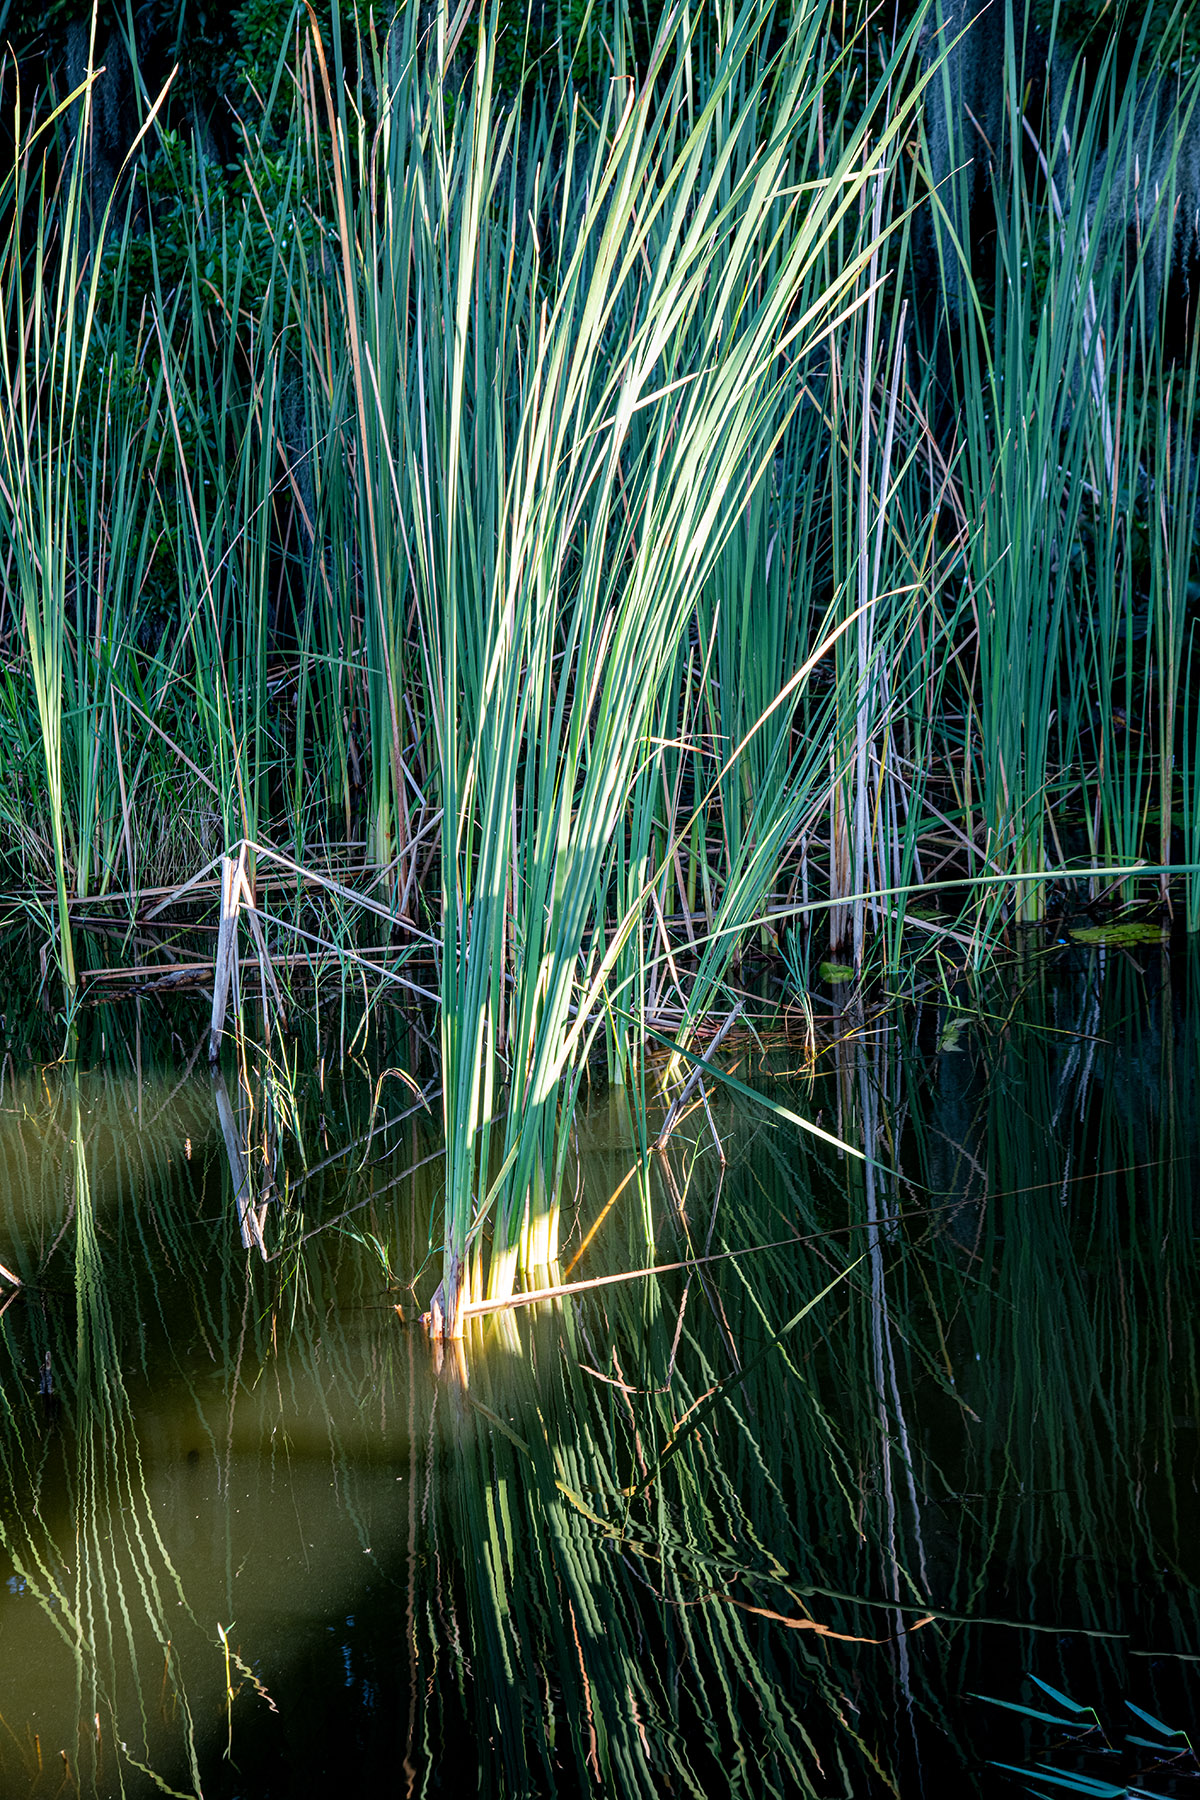 Reeds-in-Calm-Water